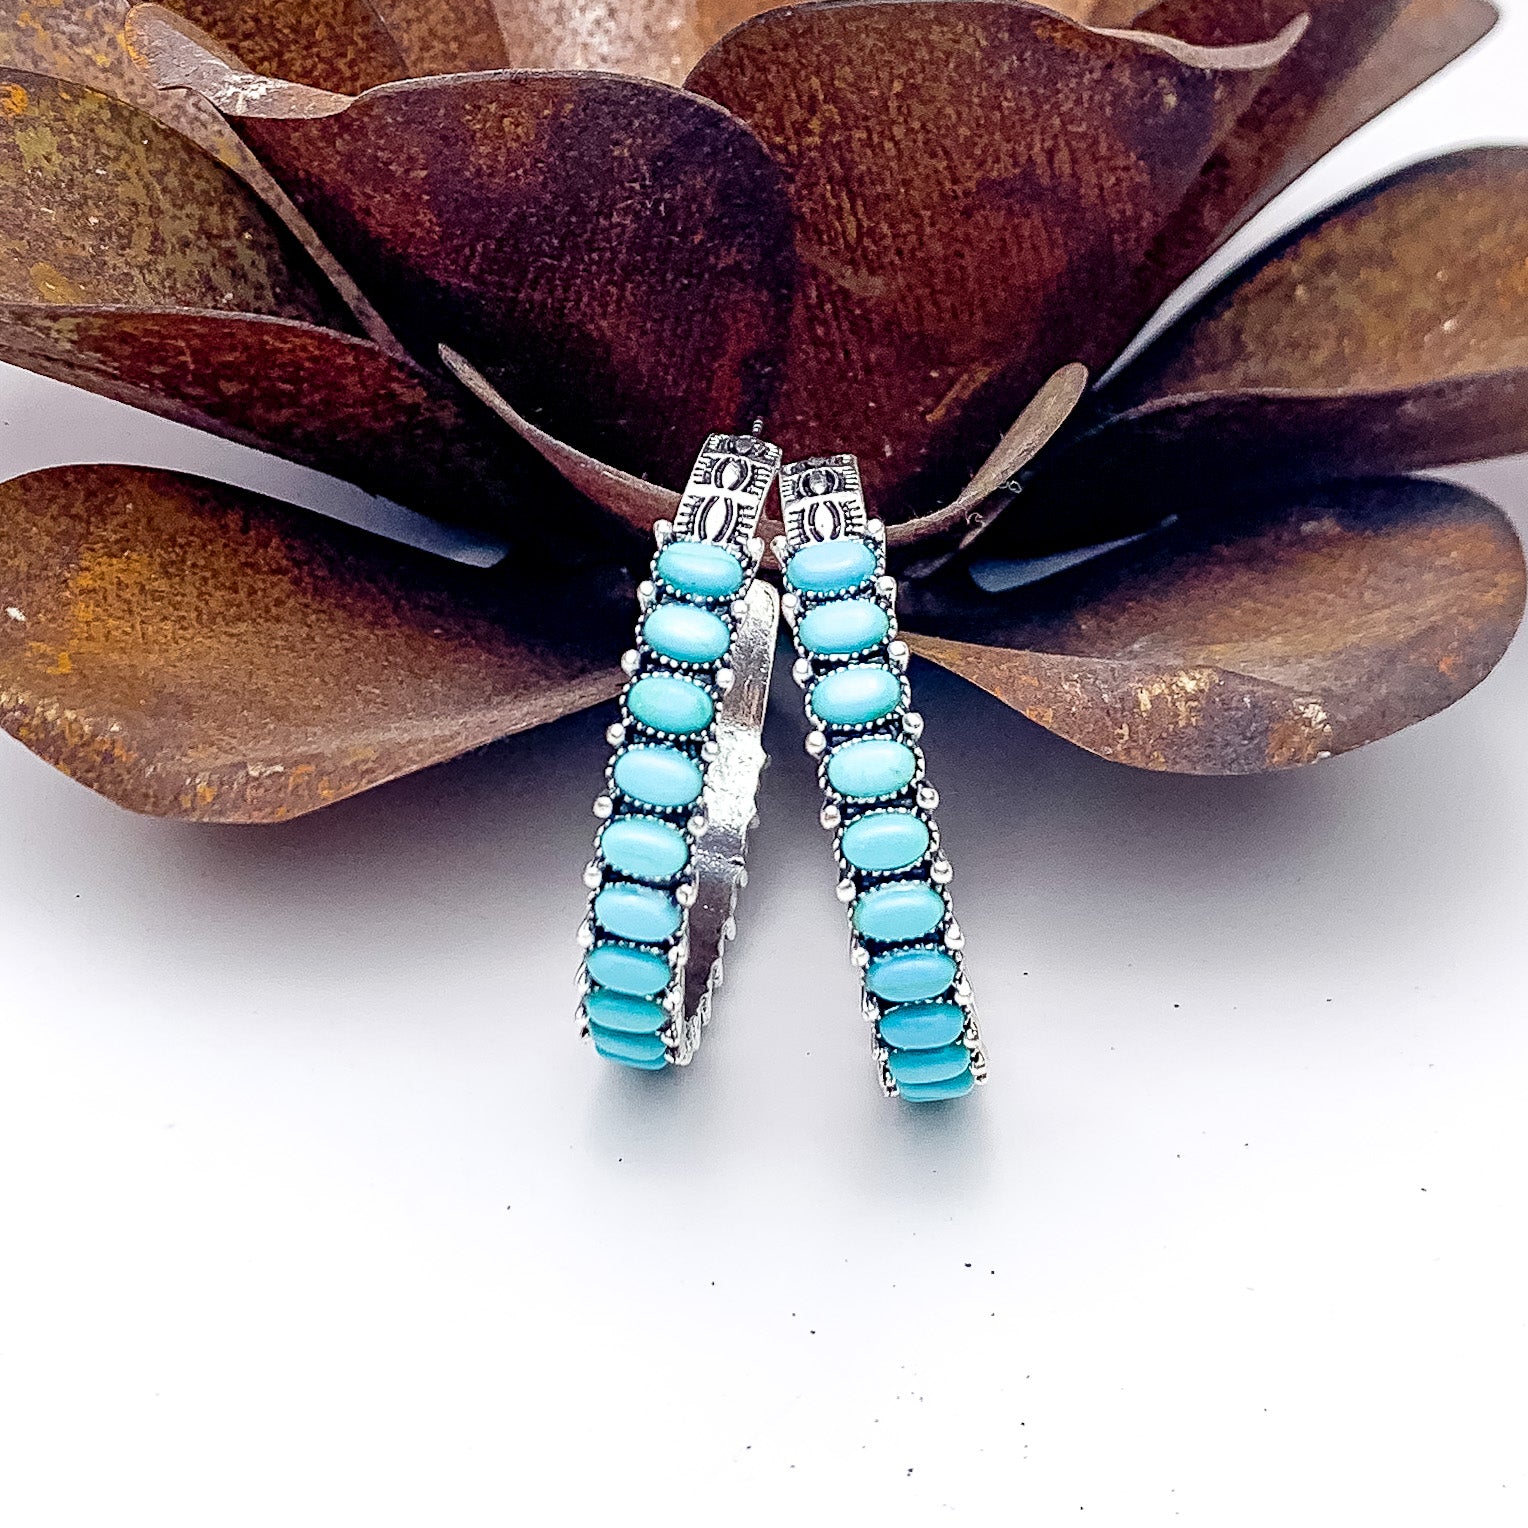 Silver Tone Semi Hoop Earring with Turquoise Stones. Pictured on a white background with the earrings against a metal flower.